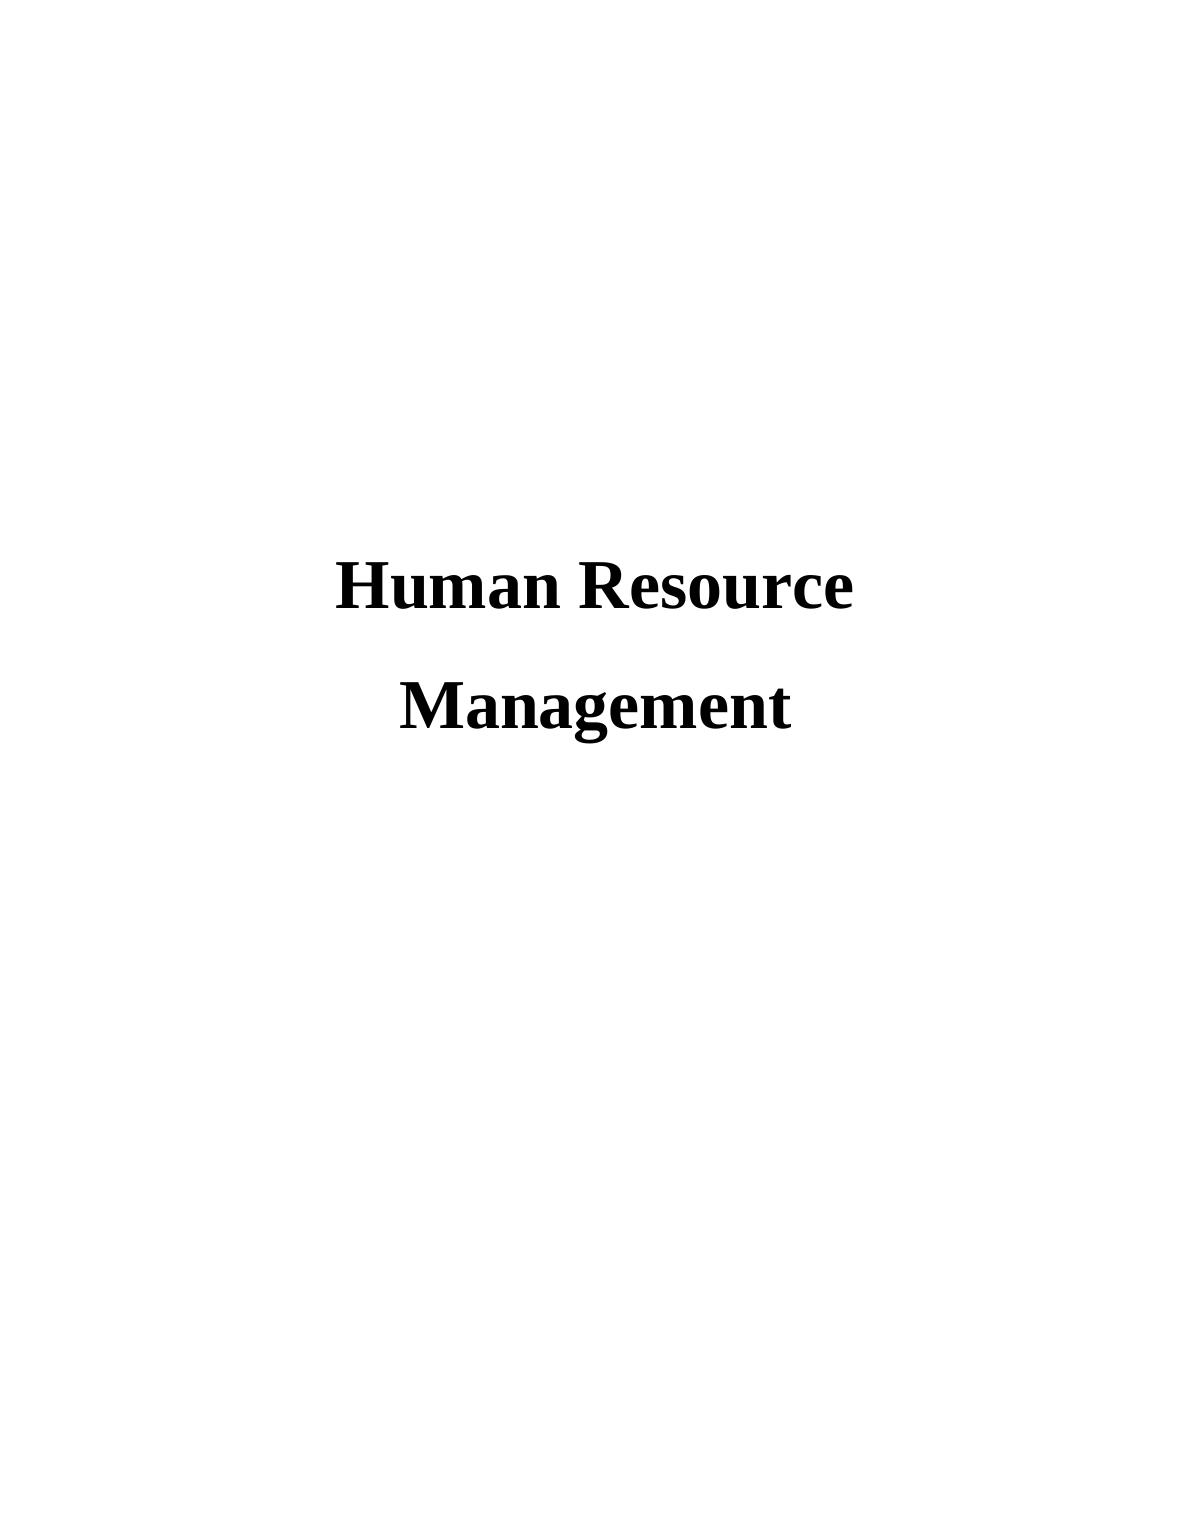 HRM Practices and Processes: An Introduction_1